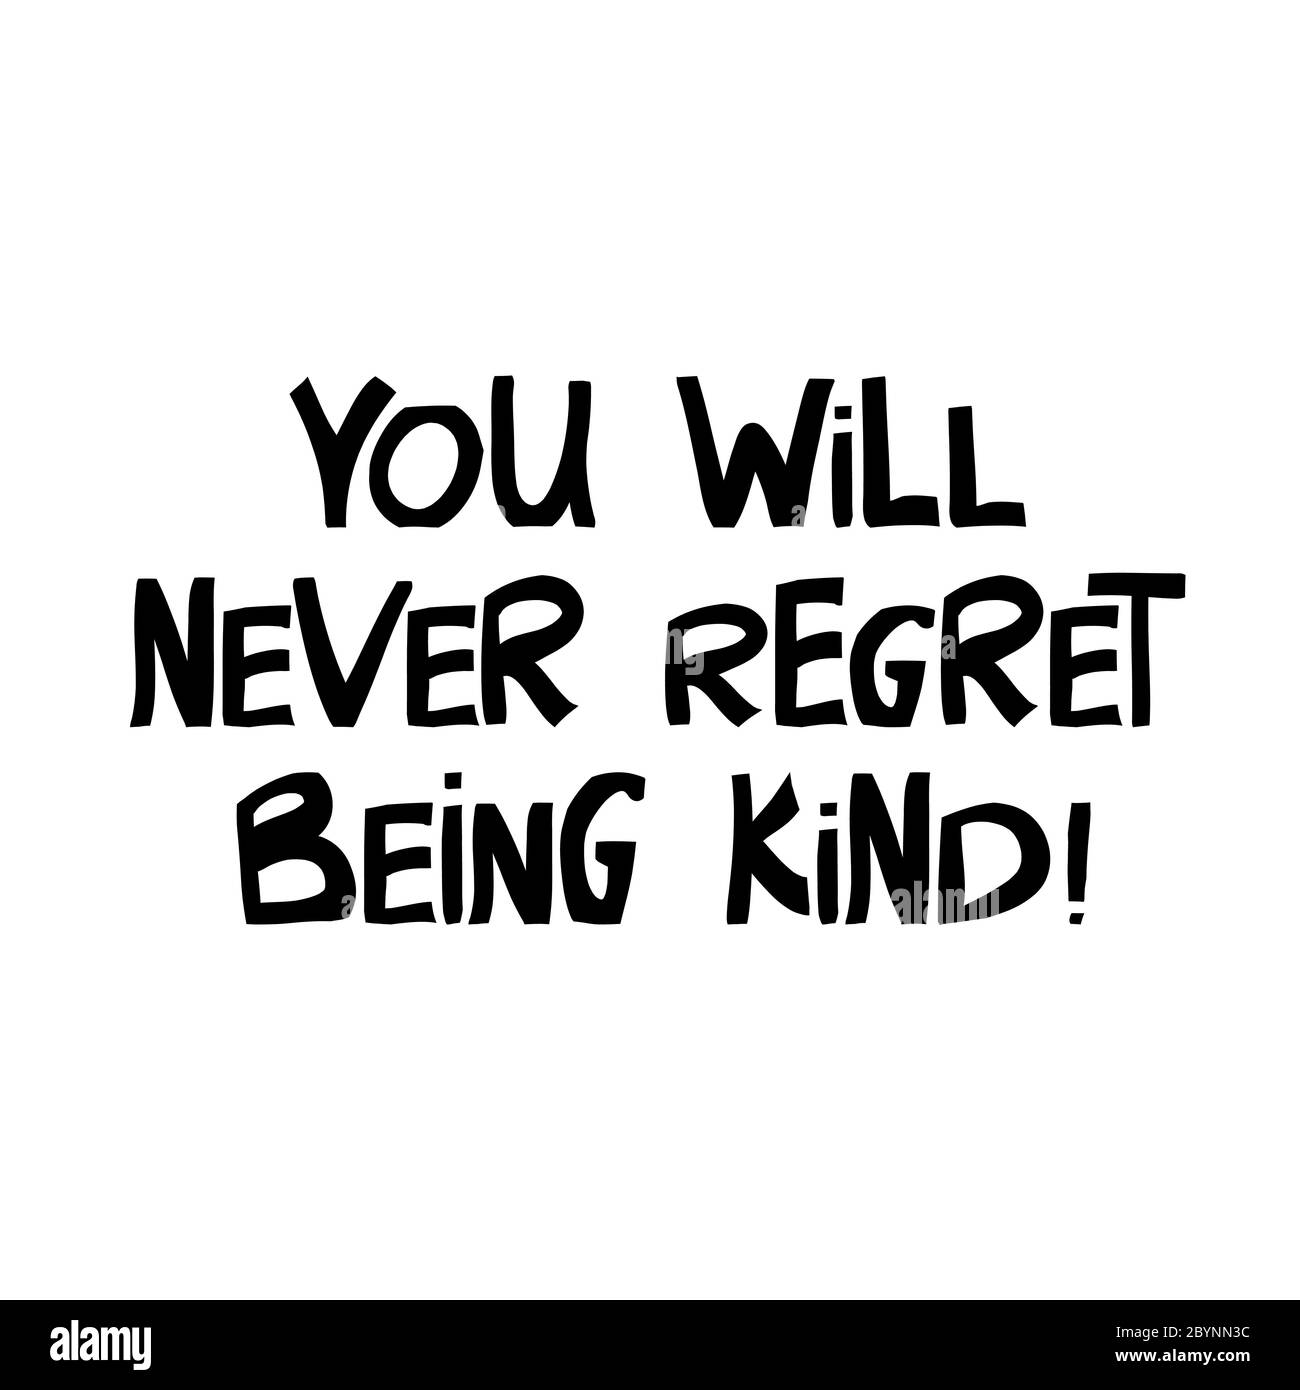 You will never regret being kind. Motivation quote. Cute hand drawn lettering in modern scandinavian style. Isolated on white background. Vector stock Stock Vector